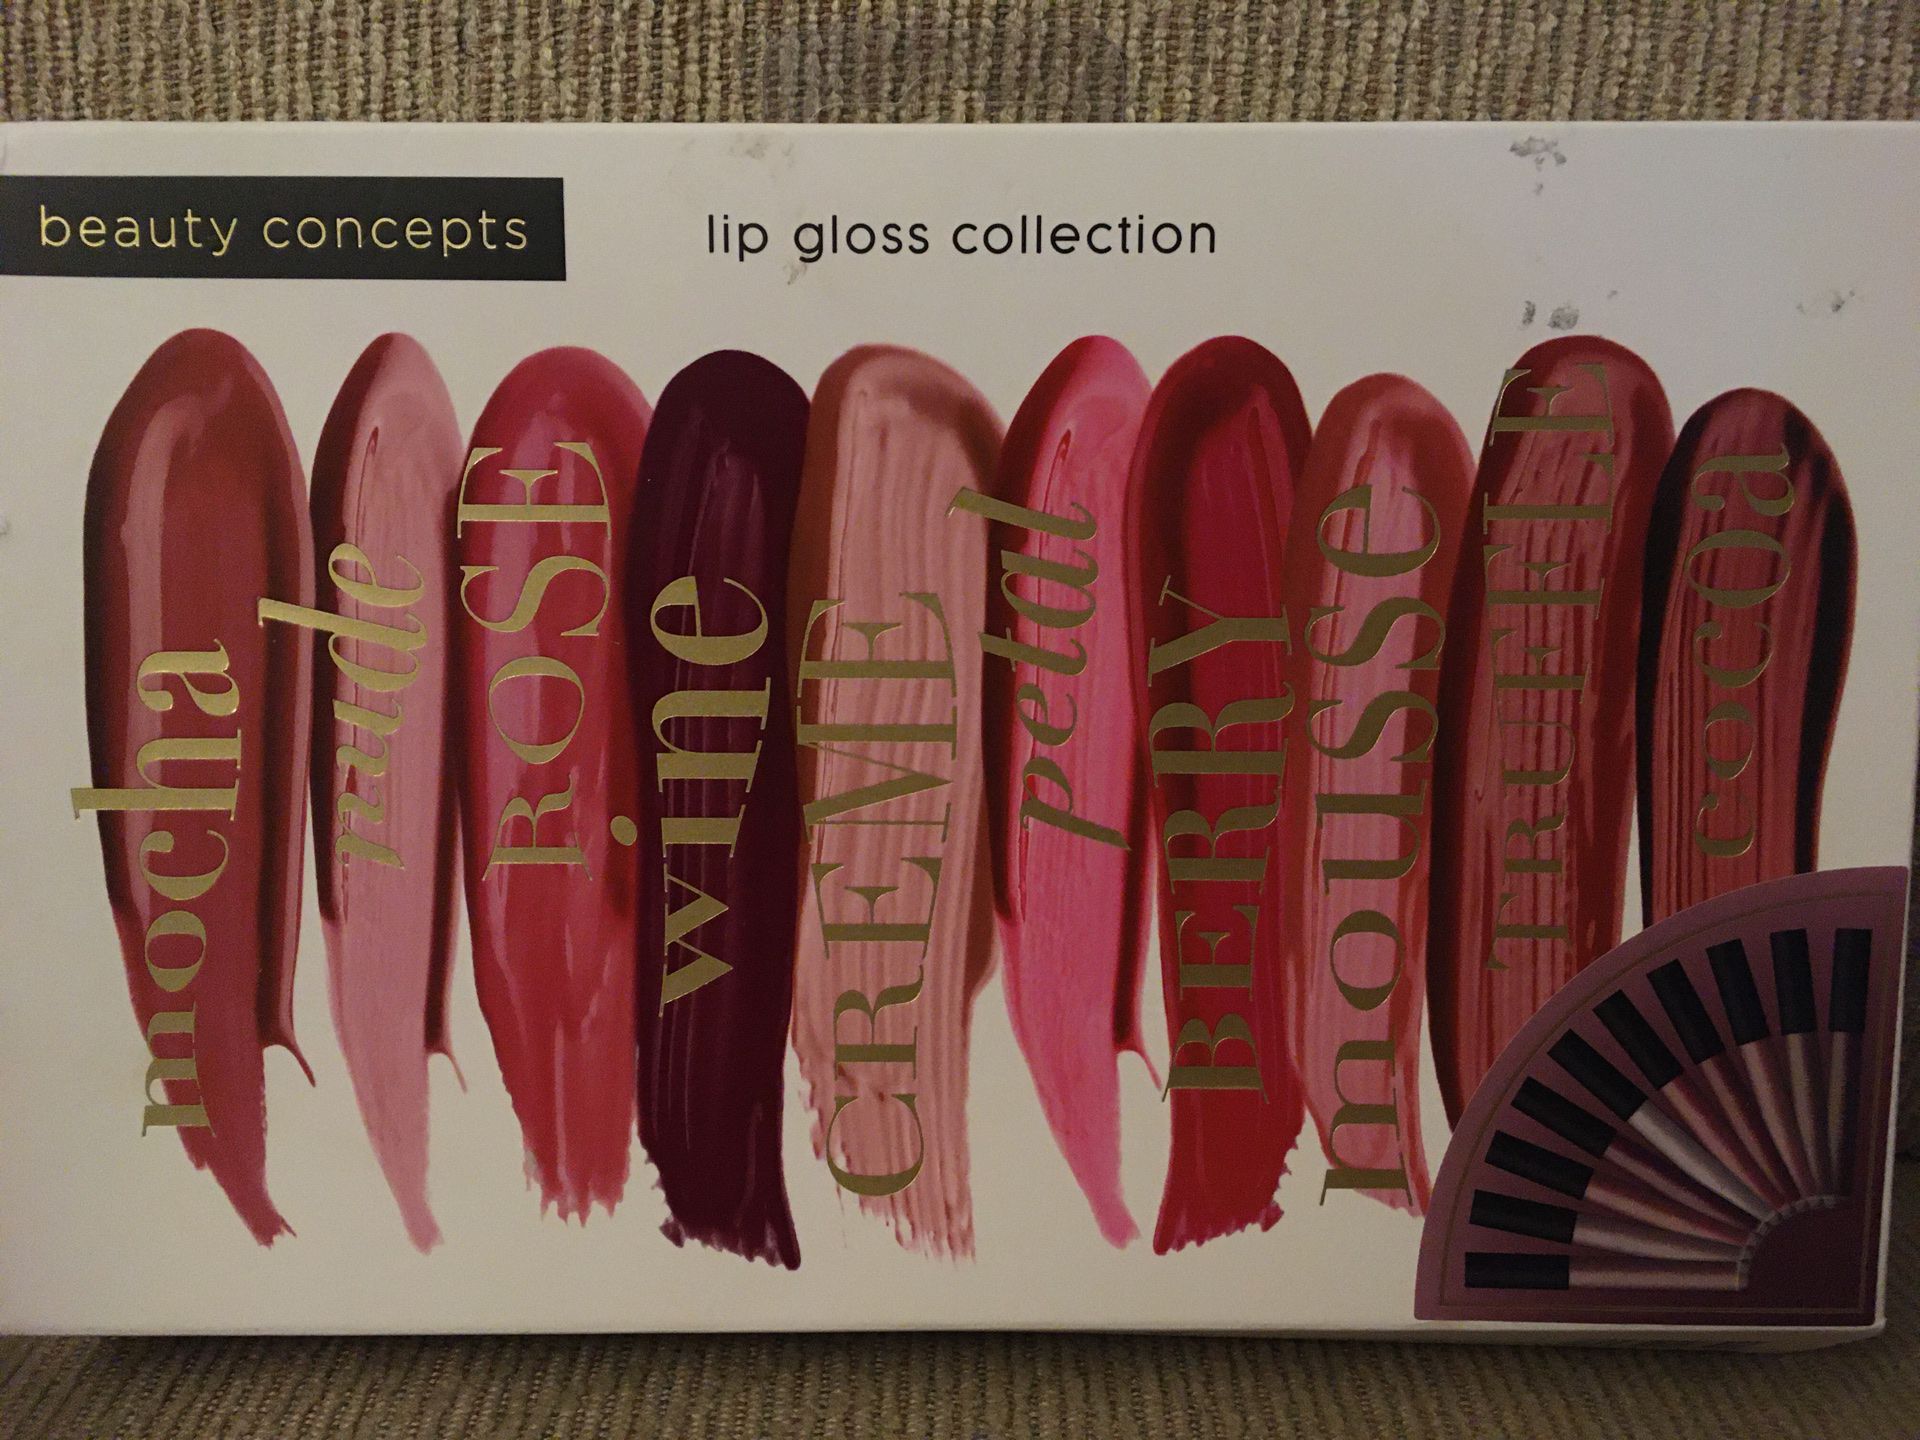 Beauty Concepts Lip Gloss Collection